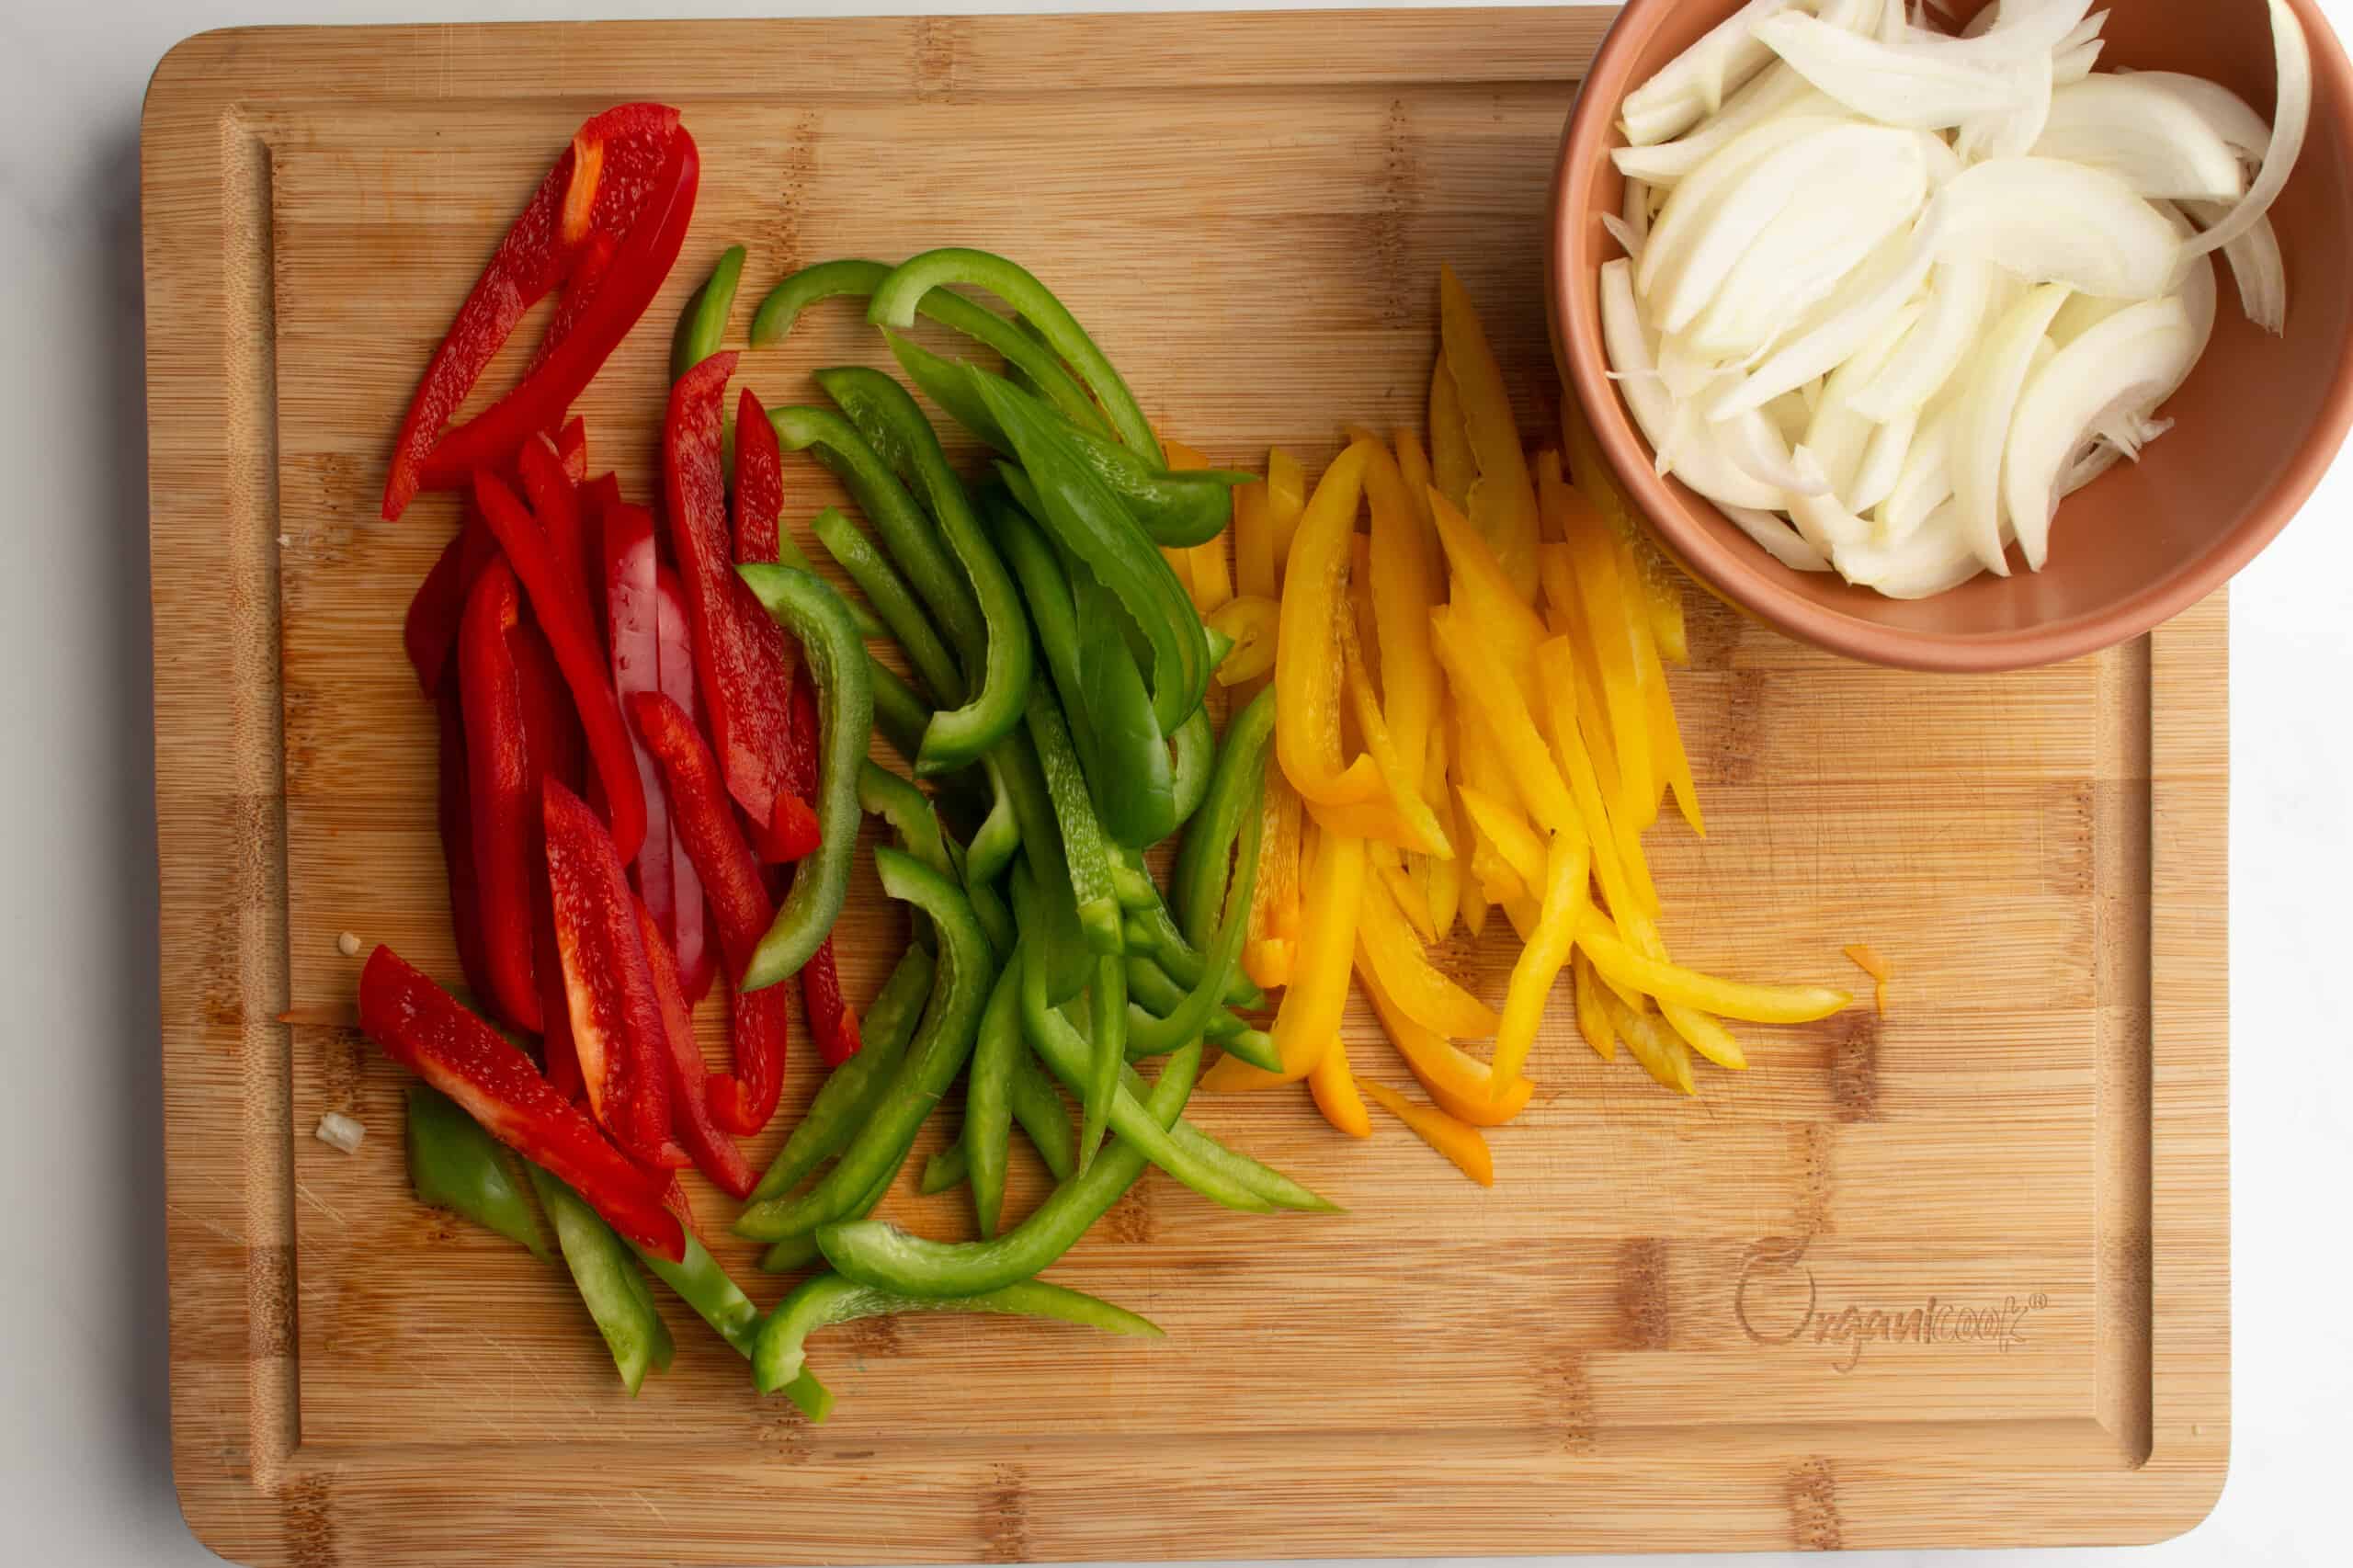 Chopped peppers on board